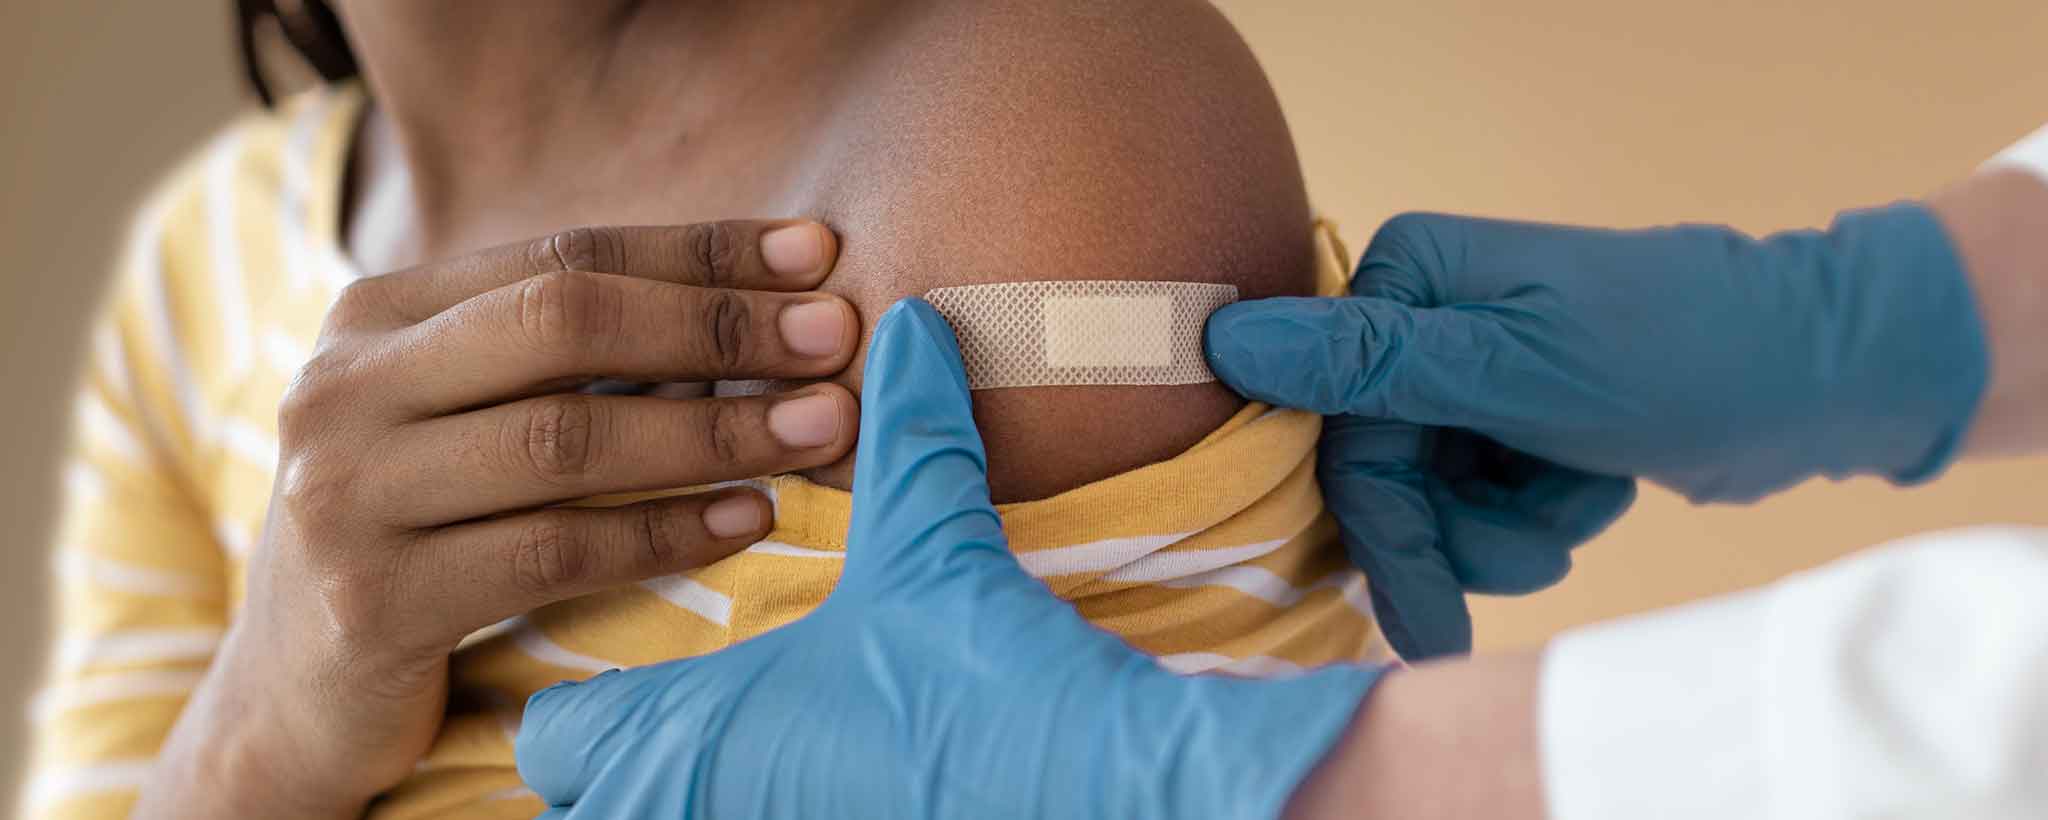 'African American woman bandaged after vaccine'